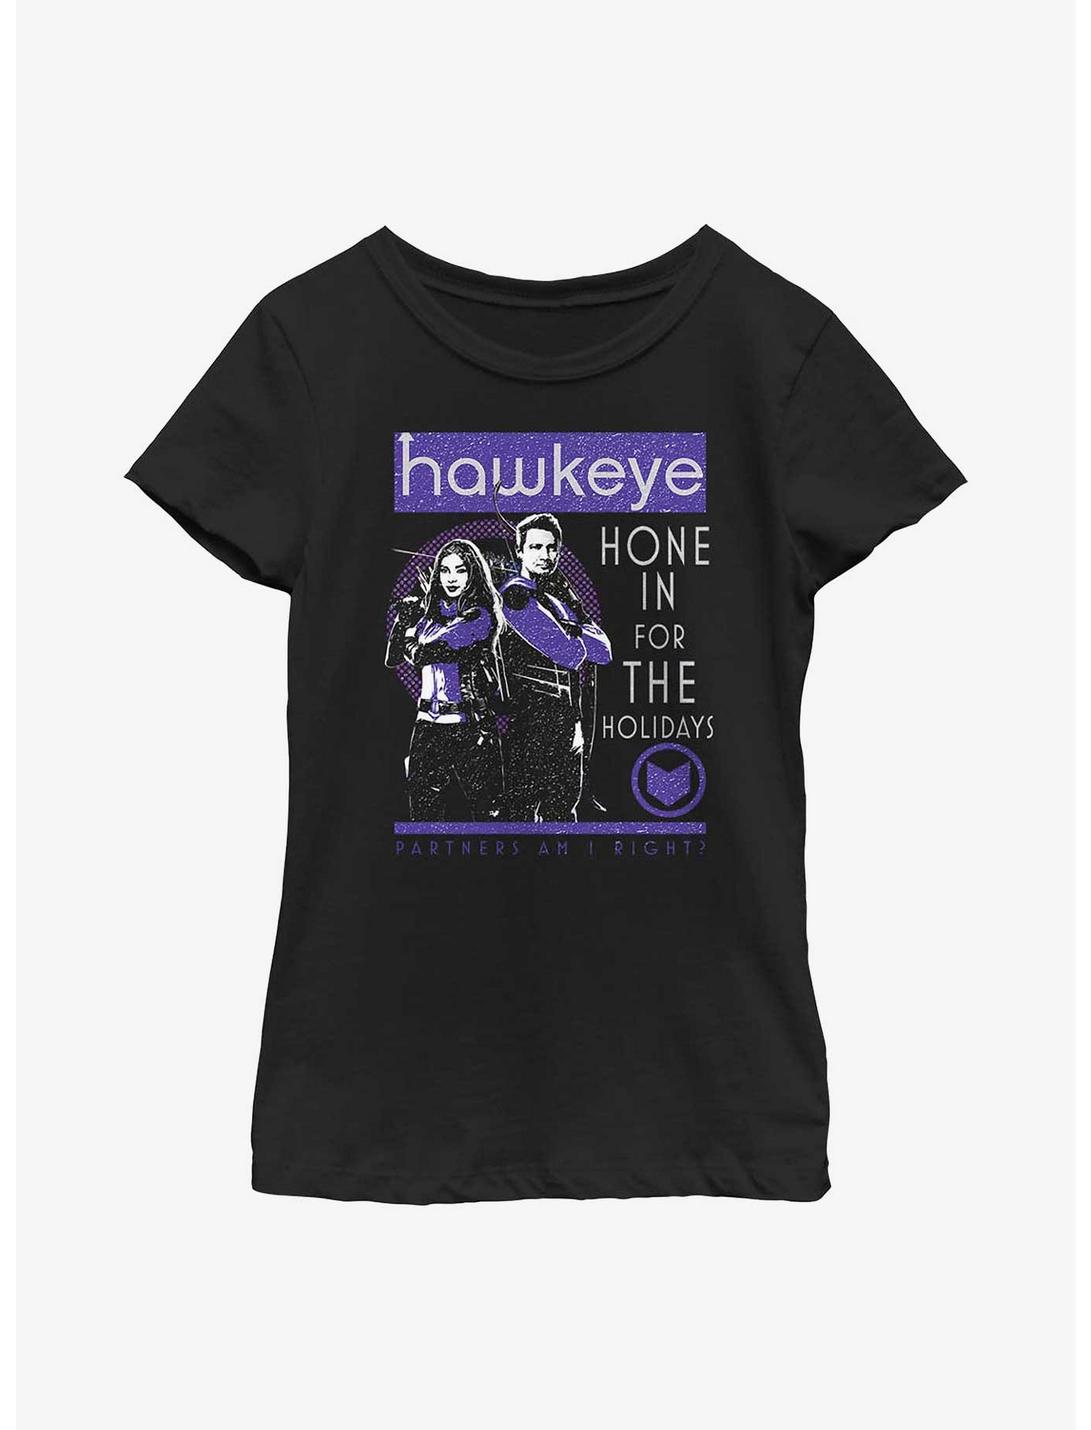 Marvel Hawkeye Hone In For The Holidays Poster Youth Girls T-Shirt, BLACK, hi-res